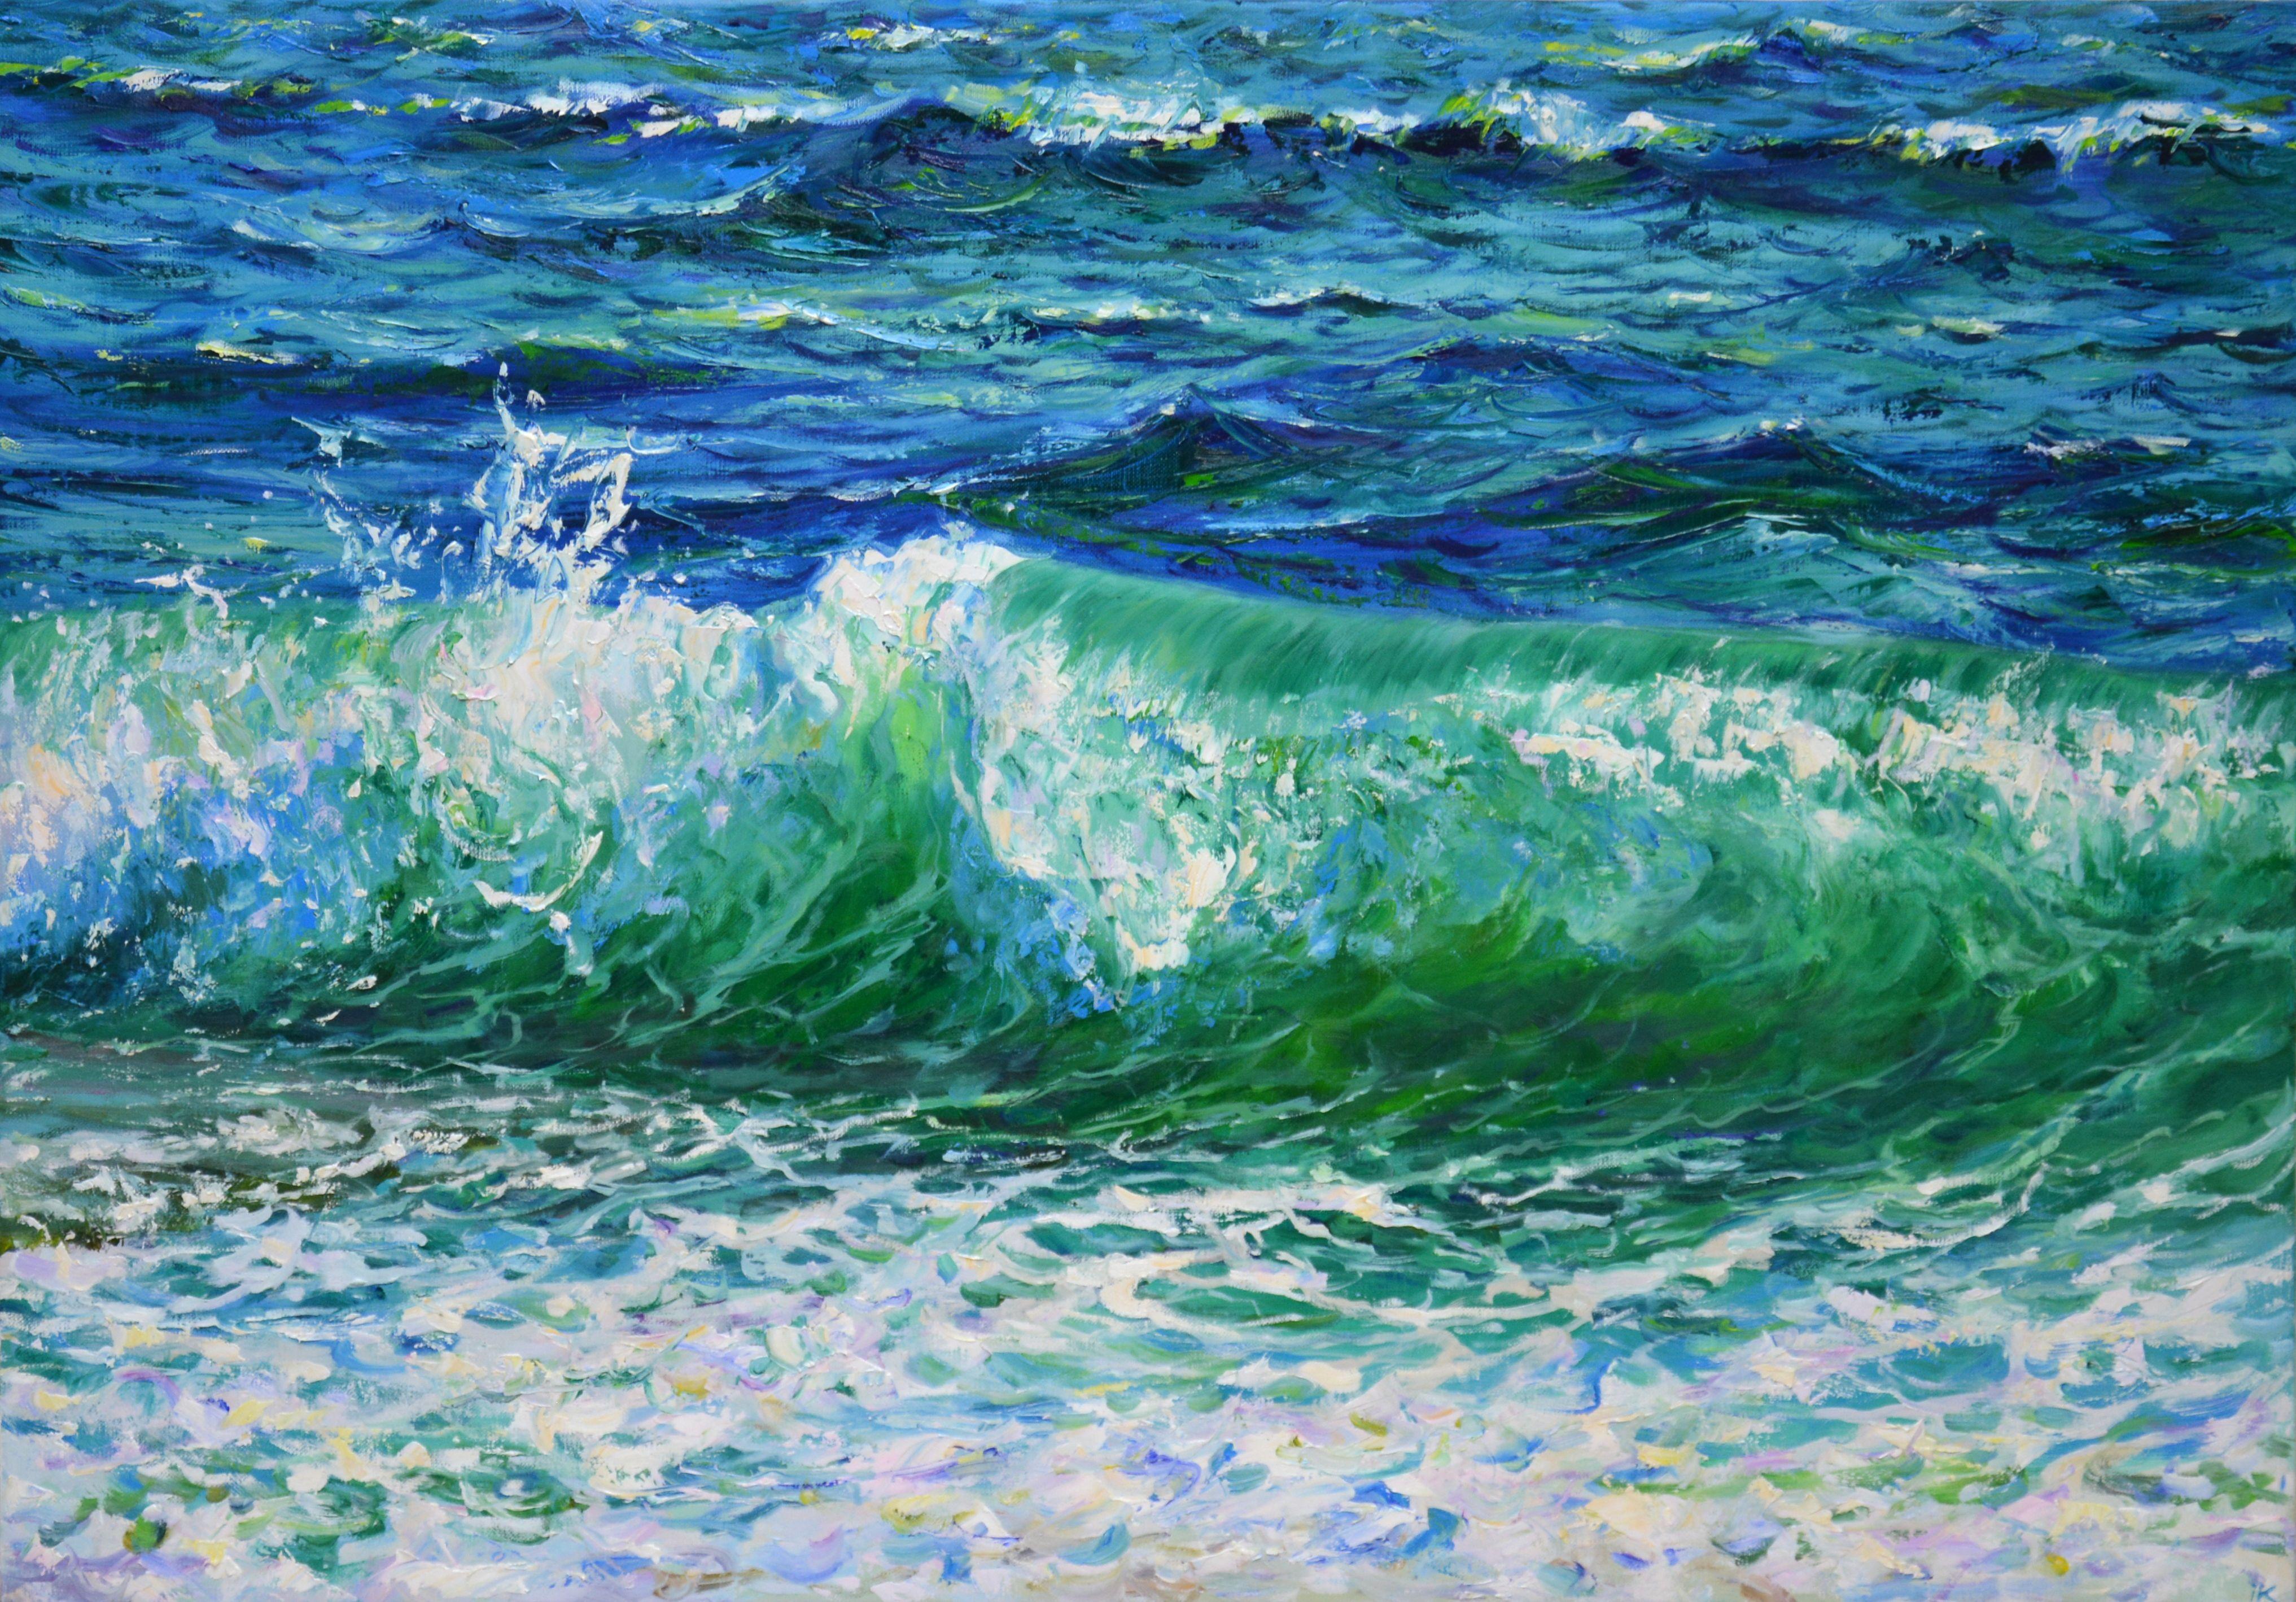 The waves gently fall with a light sea breeze. Bright daylight reflects off the rolling waves, creating an almost abstract composition. A rigid palette of knives and a rich palette of blue, green and white reflect the movement of water and the warm